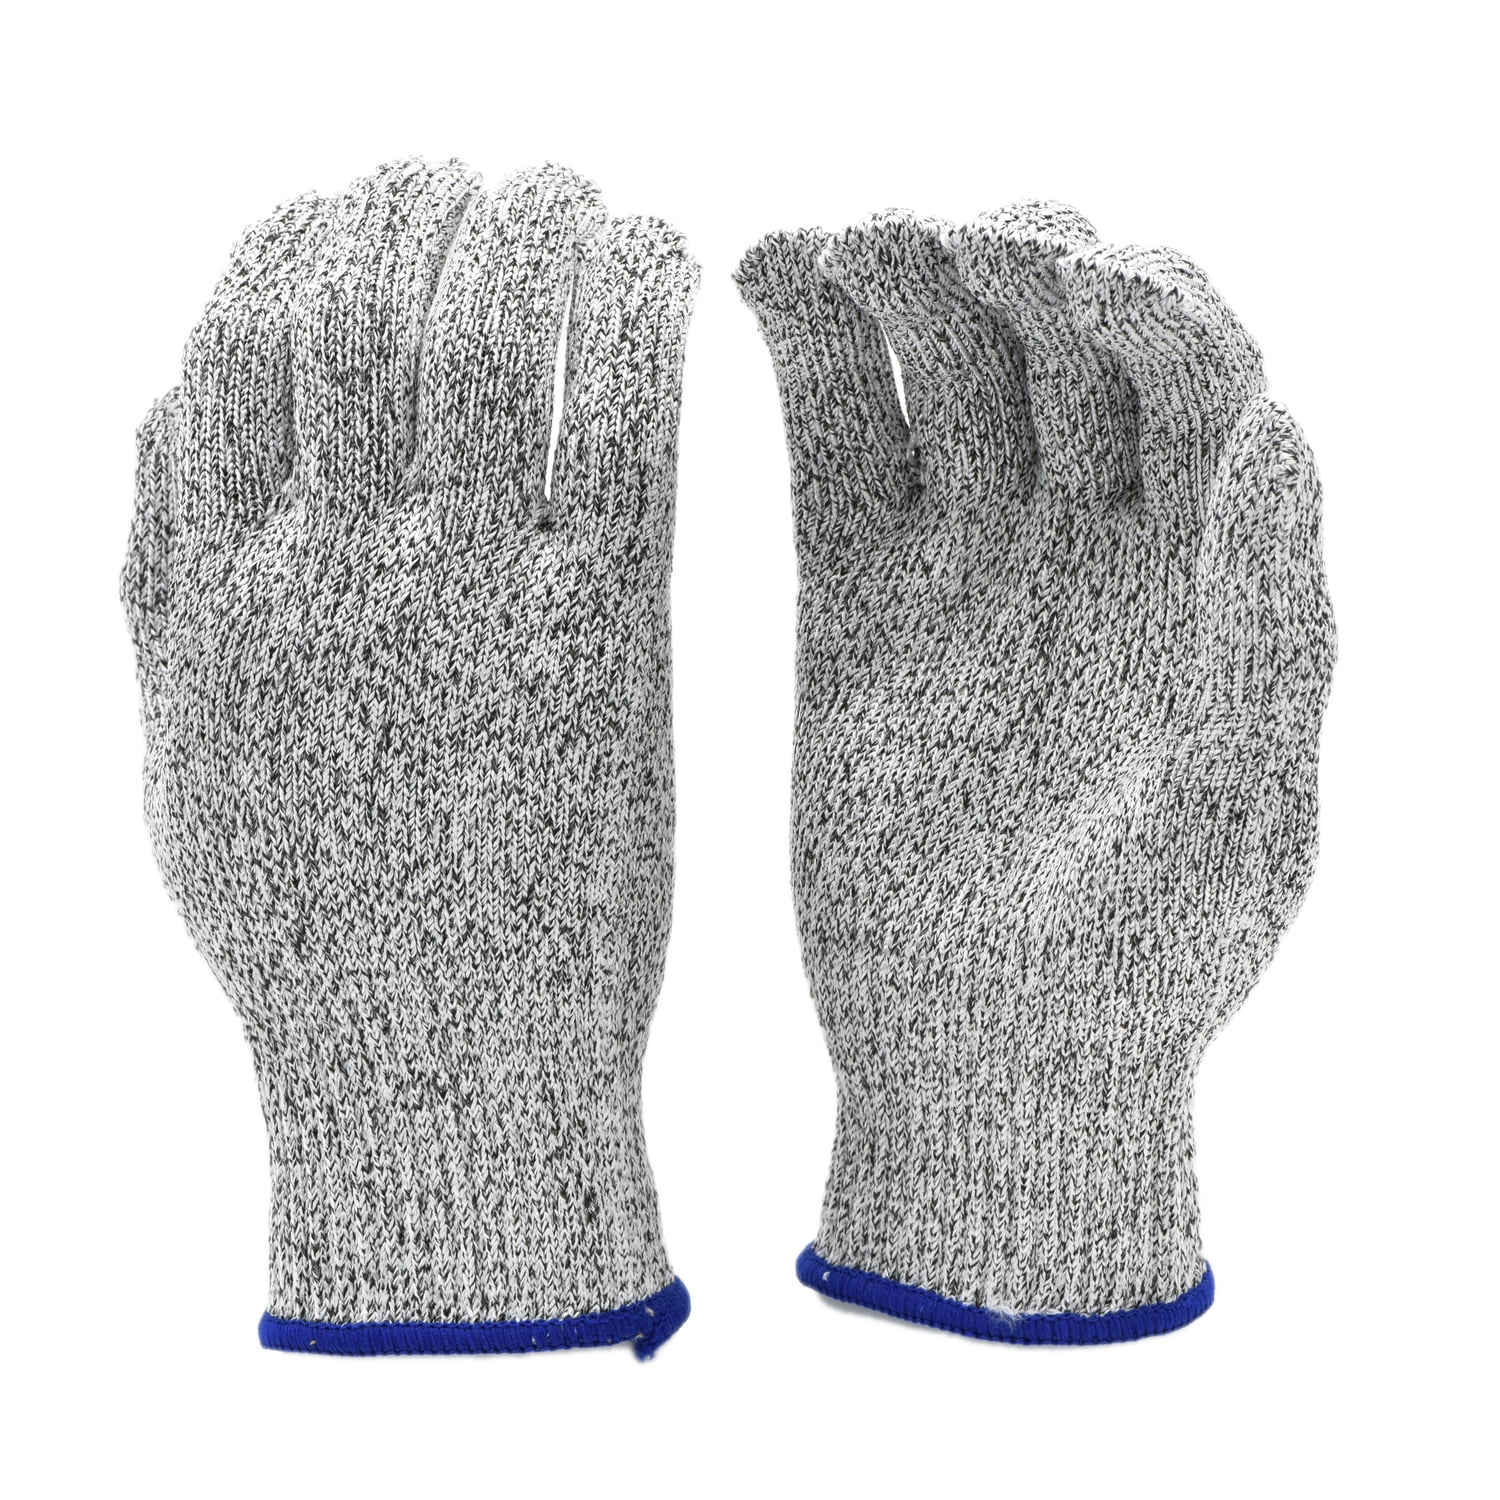 Dowellife Large Grey Protective Gloves with Cut Resistance, Machine  Washable 